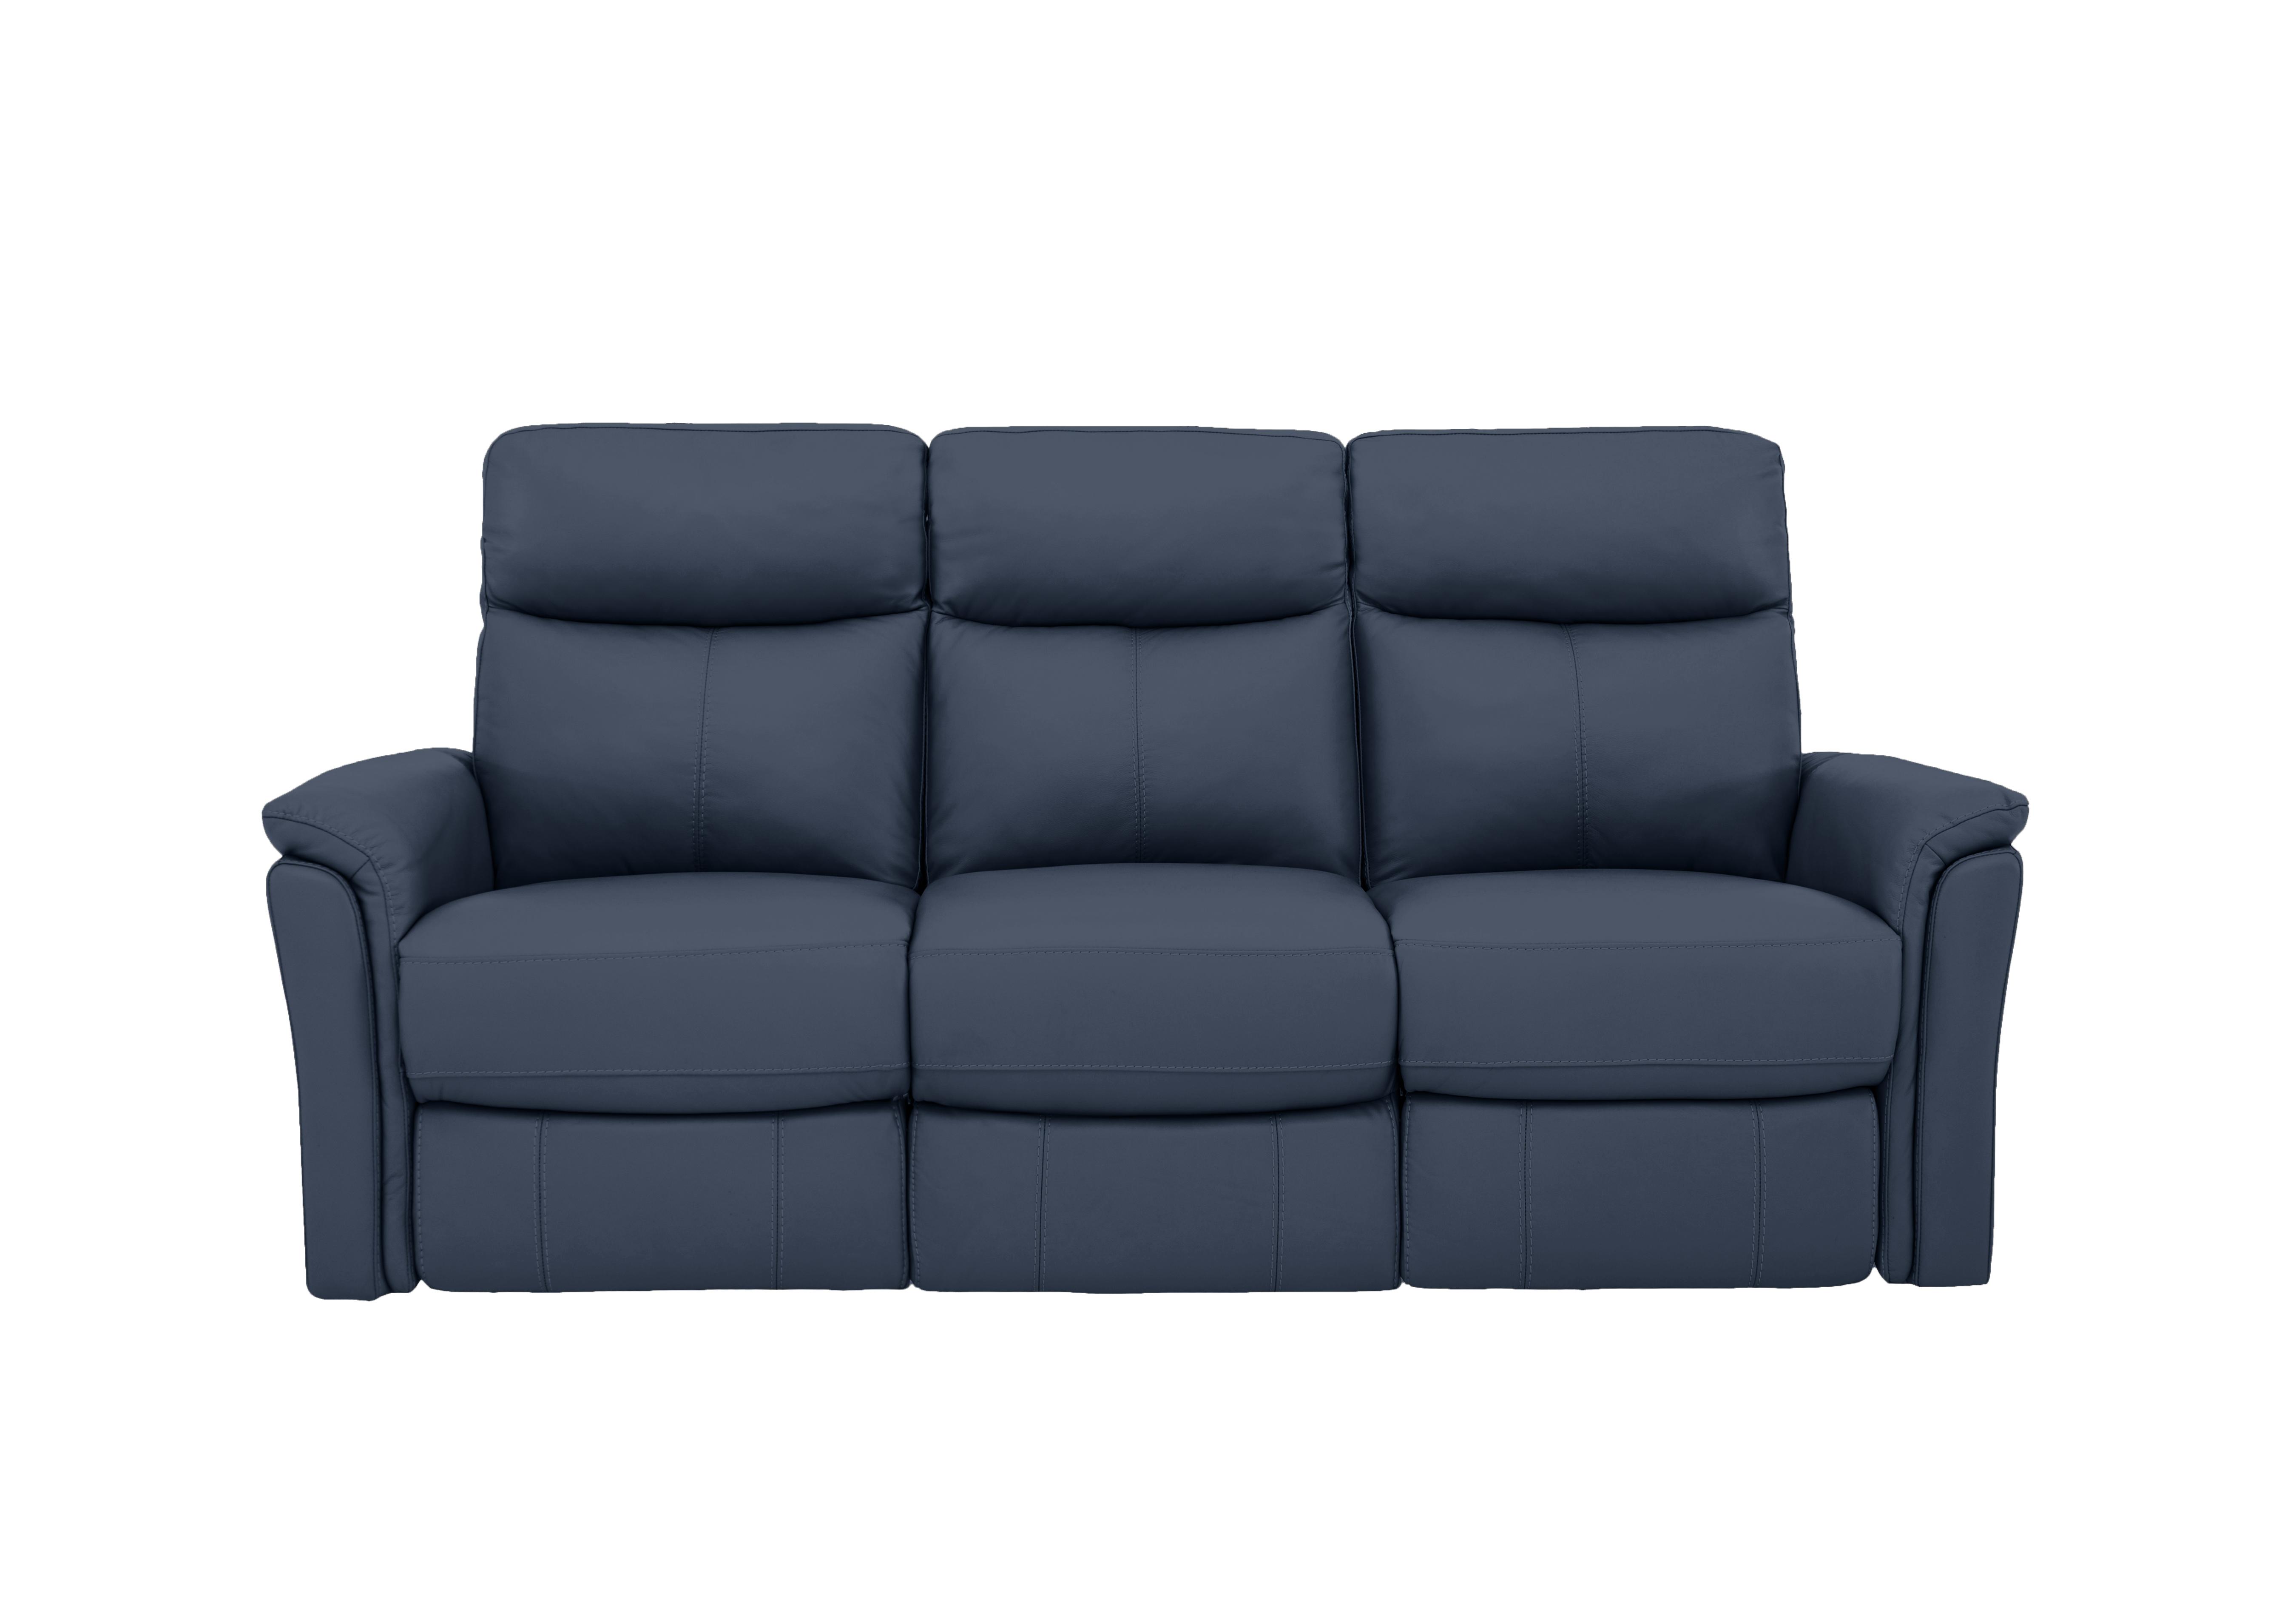 Compact Collection Piccolo 3 Seater Leather Static Sofa in Bv-313e Ocean Blue on Furniture Village